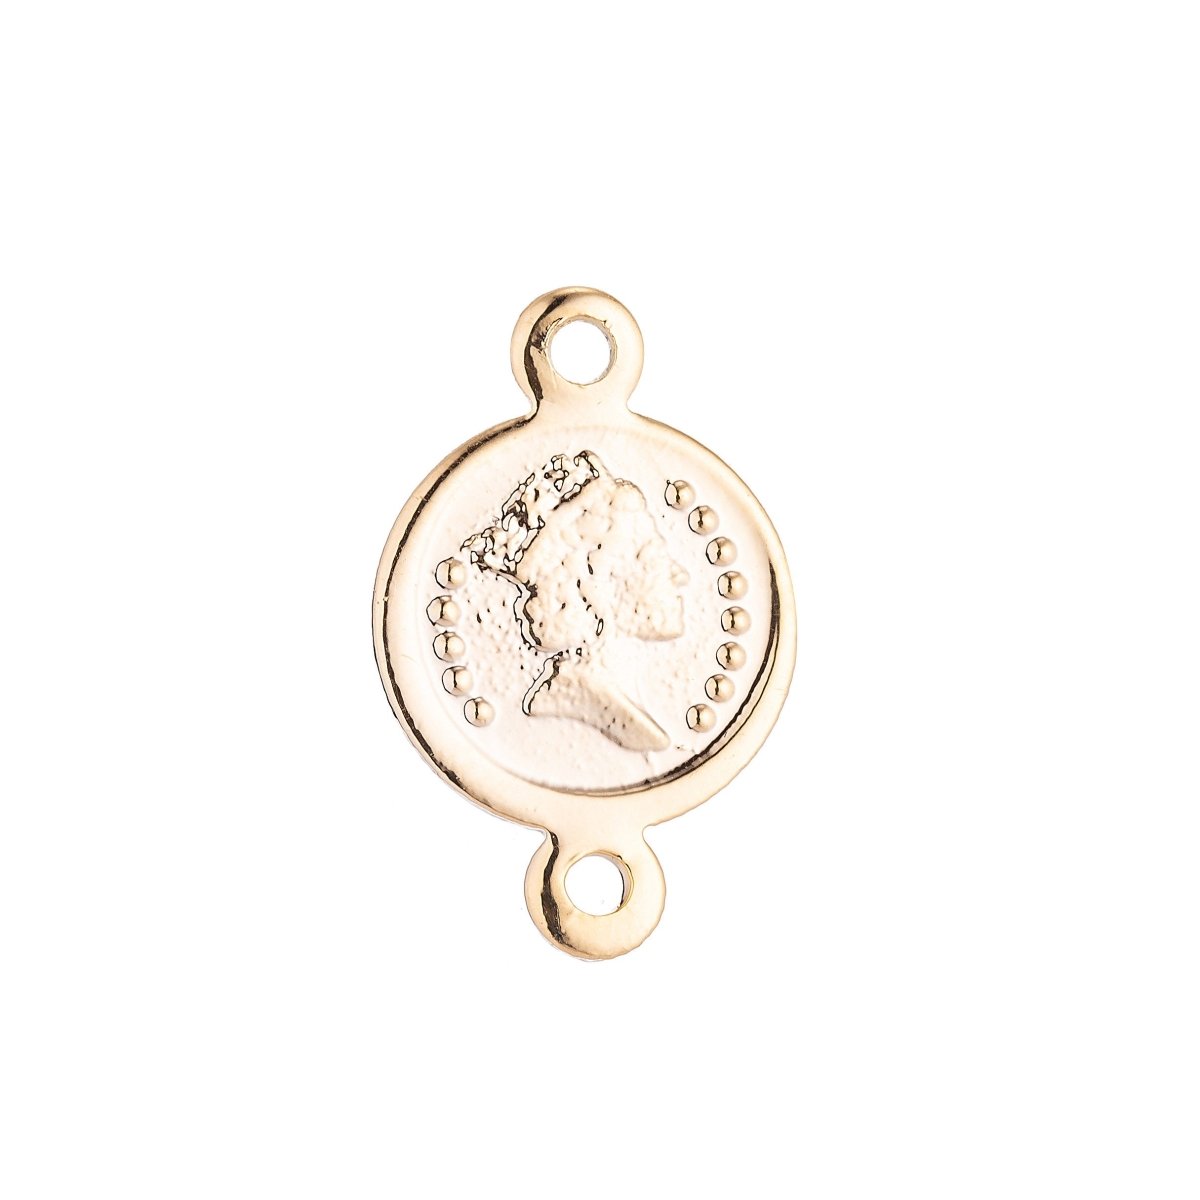 18K Gold Filled Spiritual Religious Queen Elizabeth Medallion Bracelet Charm Bead Finding Connector For Jewelry Making F-018 - DLUXCA